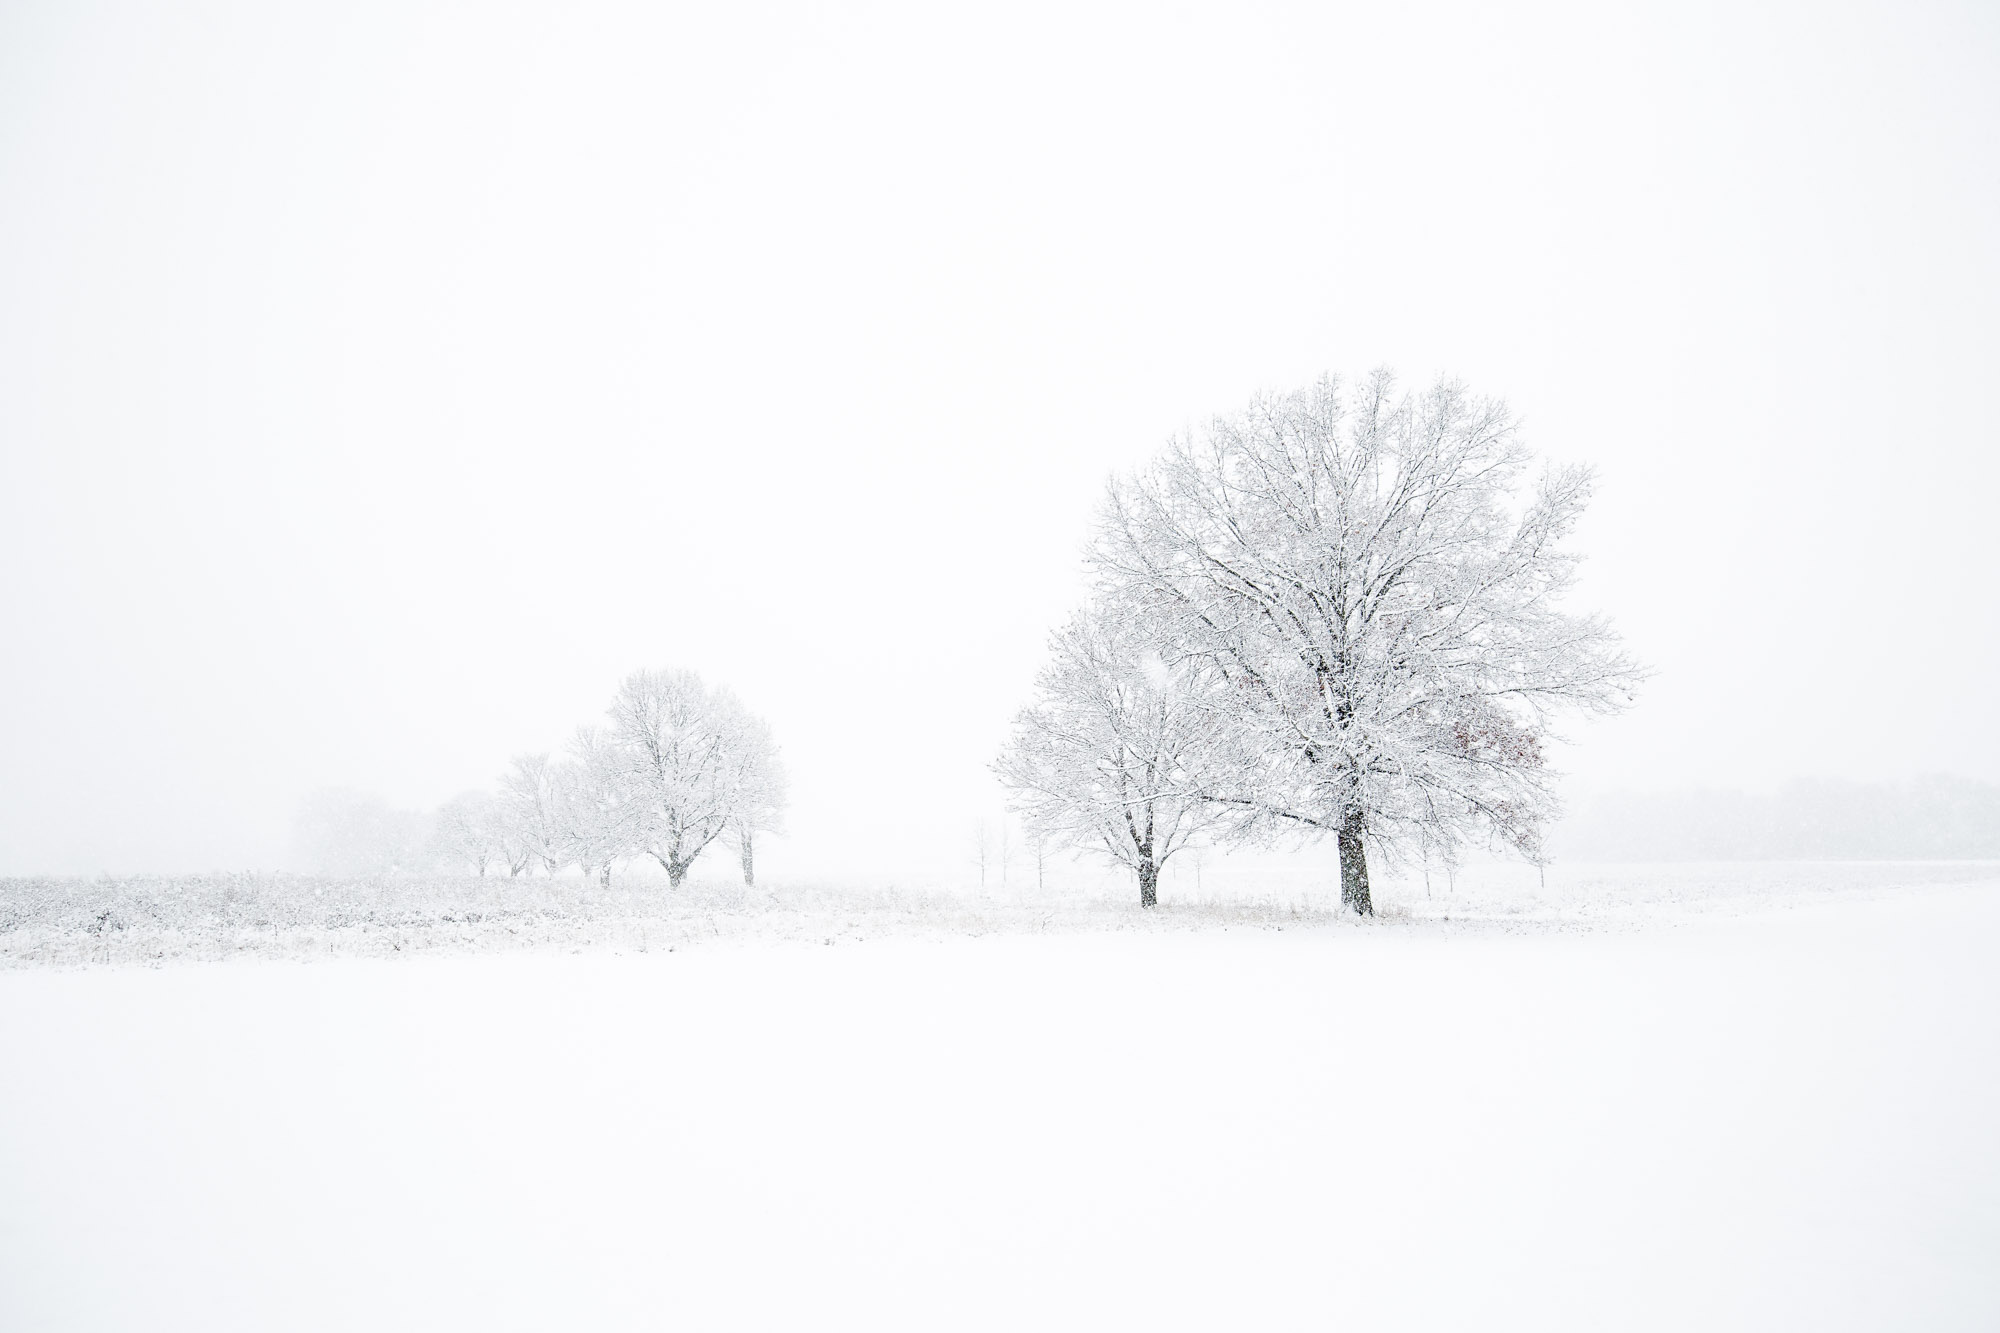 Trees in heavy snow at Leroy Oaks, St Charles, IL